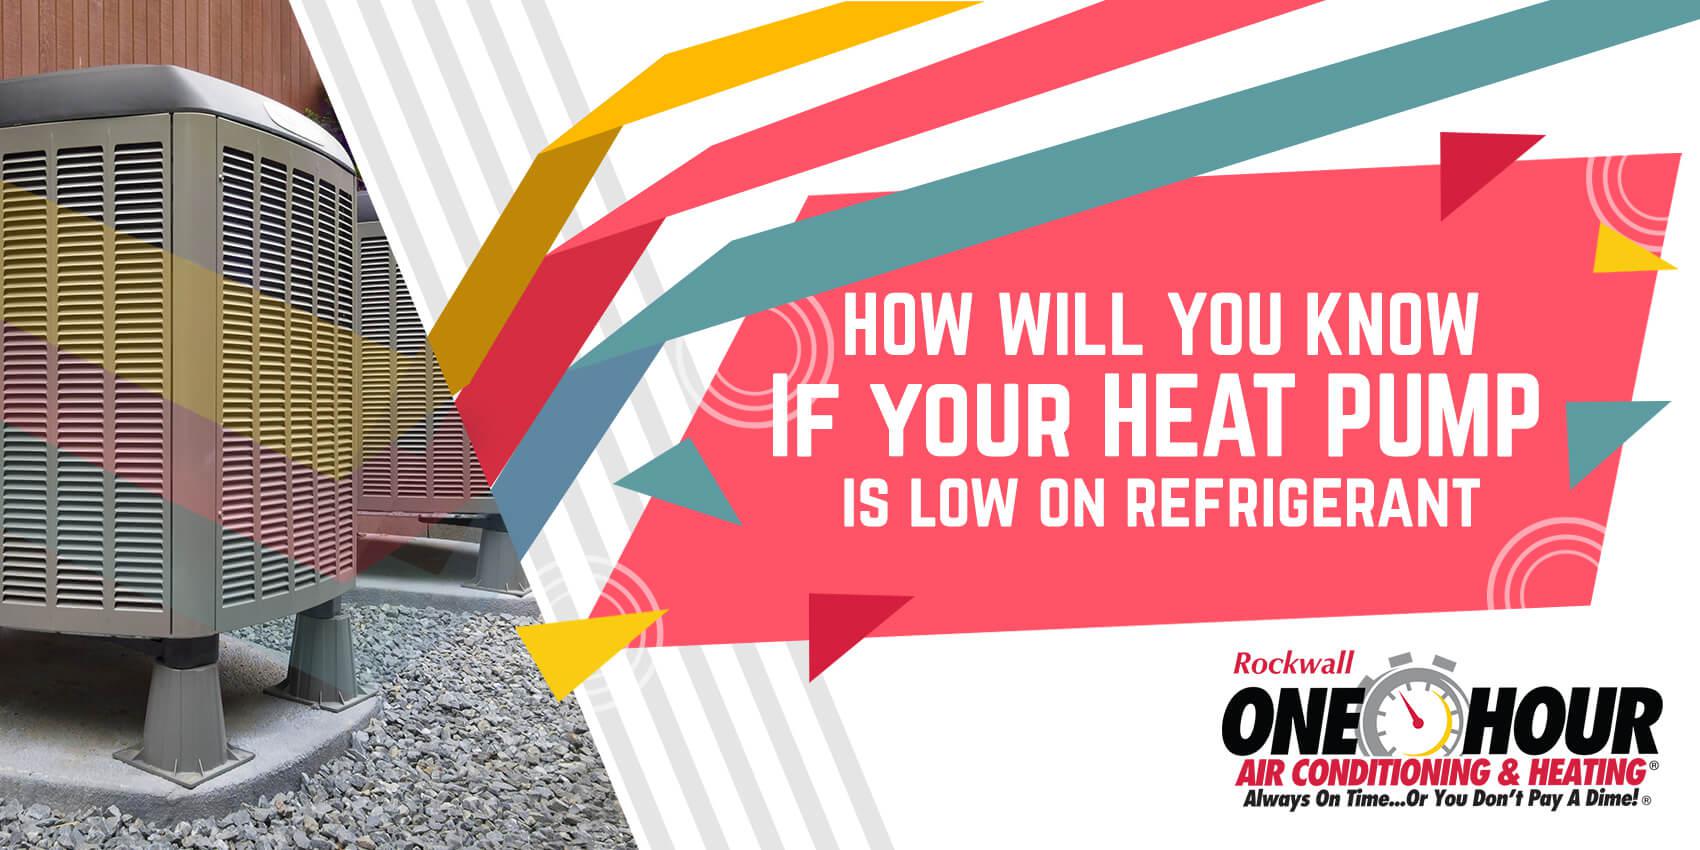 How Will You Know If Your Heat Pump Is Low On Refrigerant?